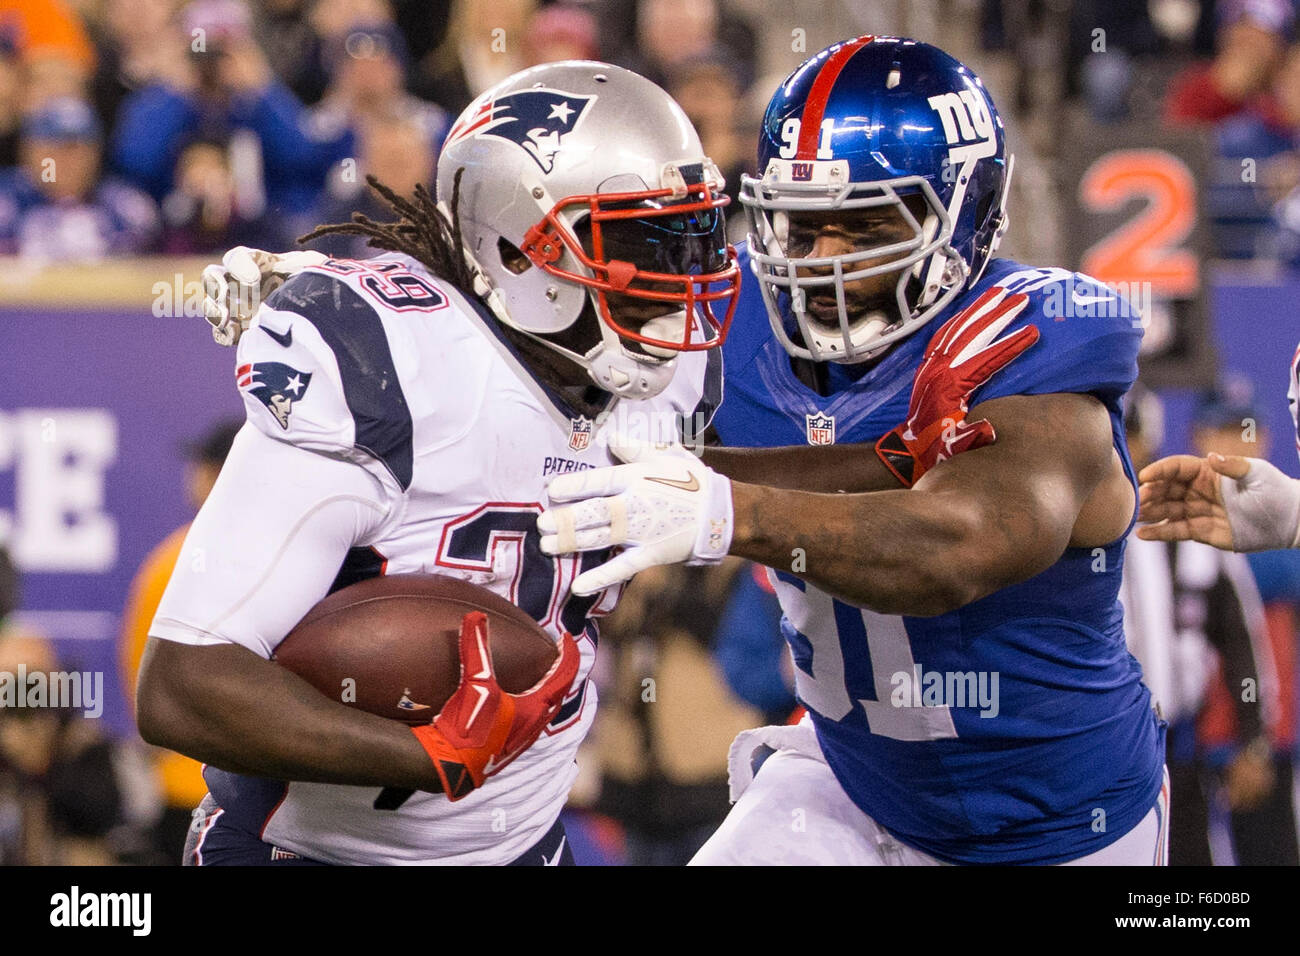 East Rutherford, New Jersey, USA. 15th Nov, 2015. New England Patriots running back LeGarrette Blount (29) runs with the ball as New York Giants defensive end Robert Ayers (91) goes after him during the NFL game between the New England Patriots and the New York Giants at MetLife Stadium in East Rutherford, New Jersey. The New England Patriots won 27-26. Christopher Szagola/CSM/Alamy Live News Stock Photo